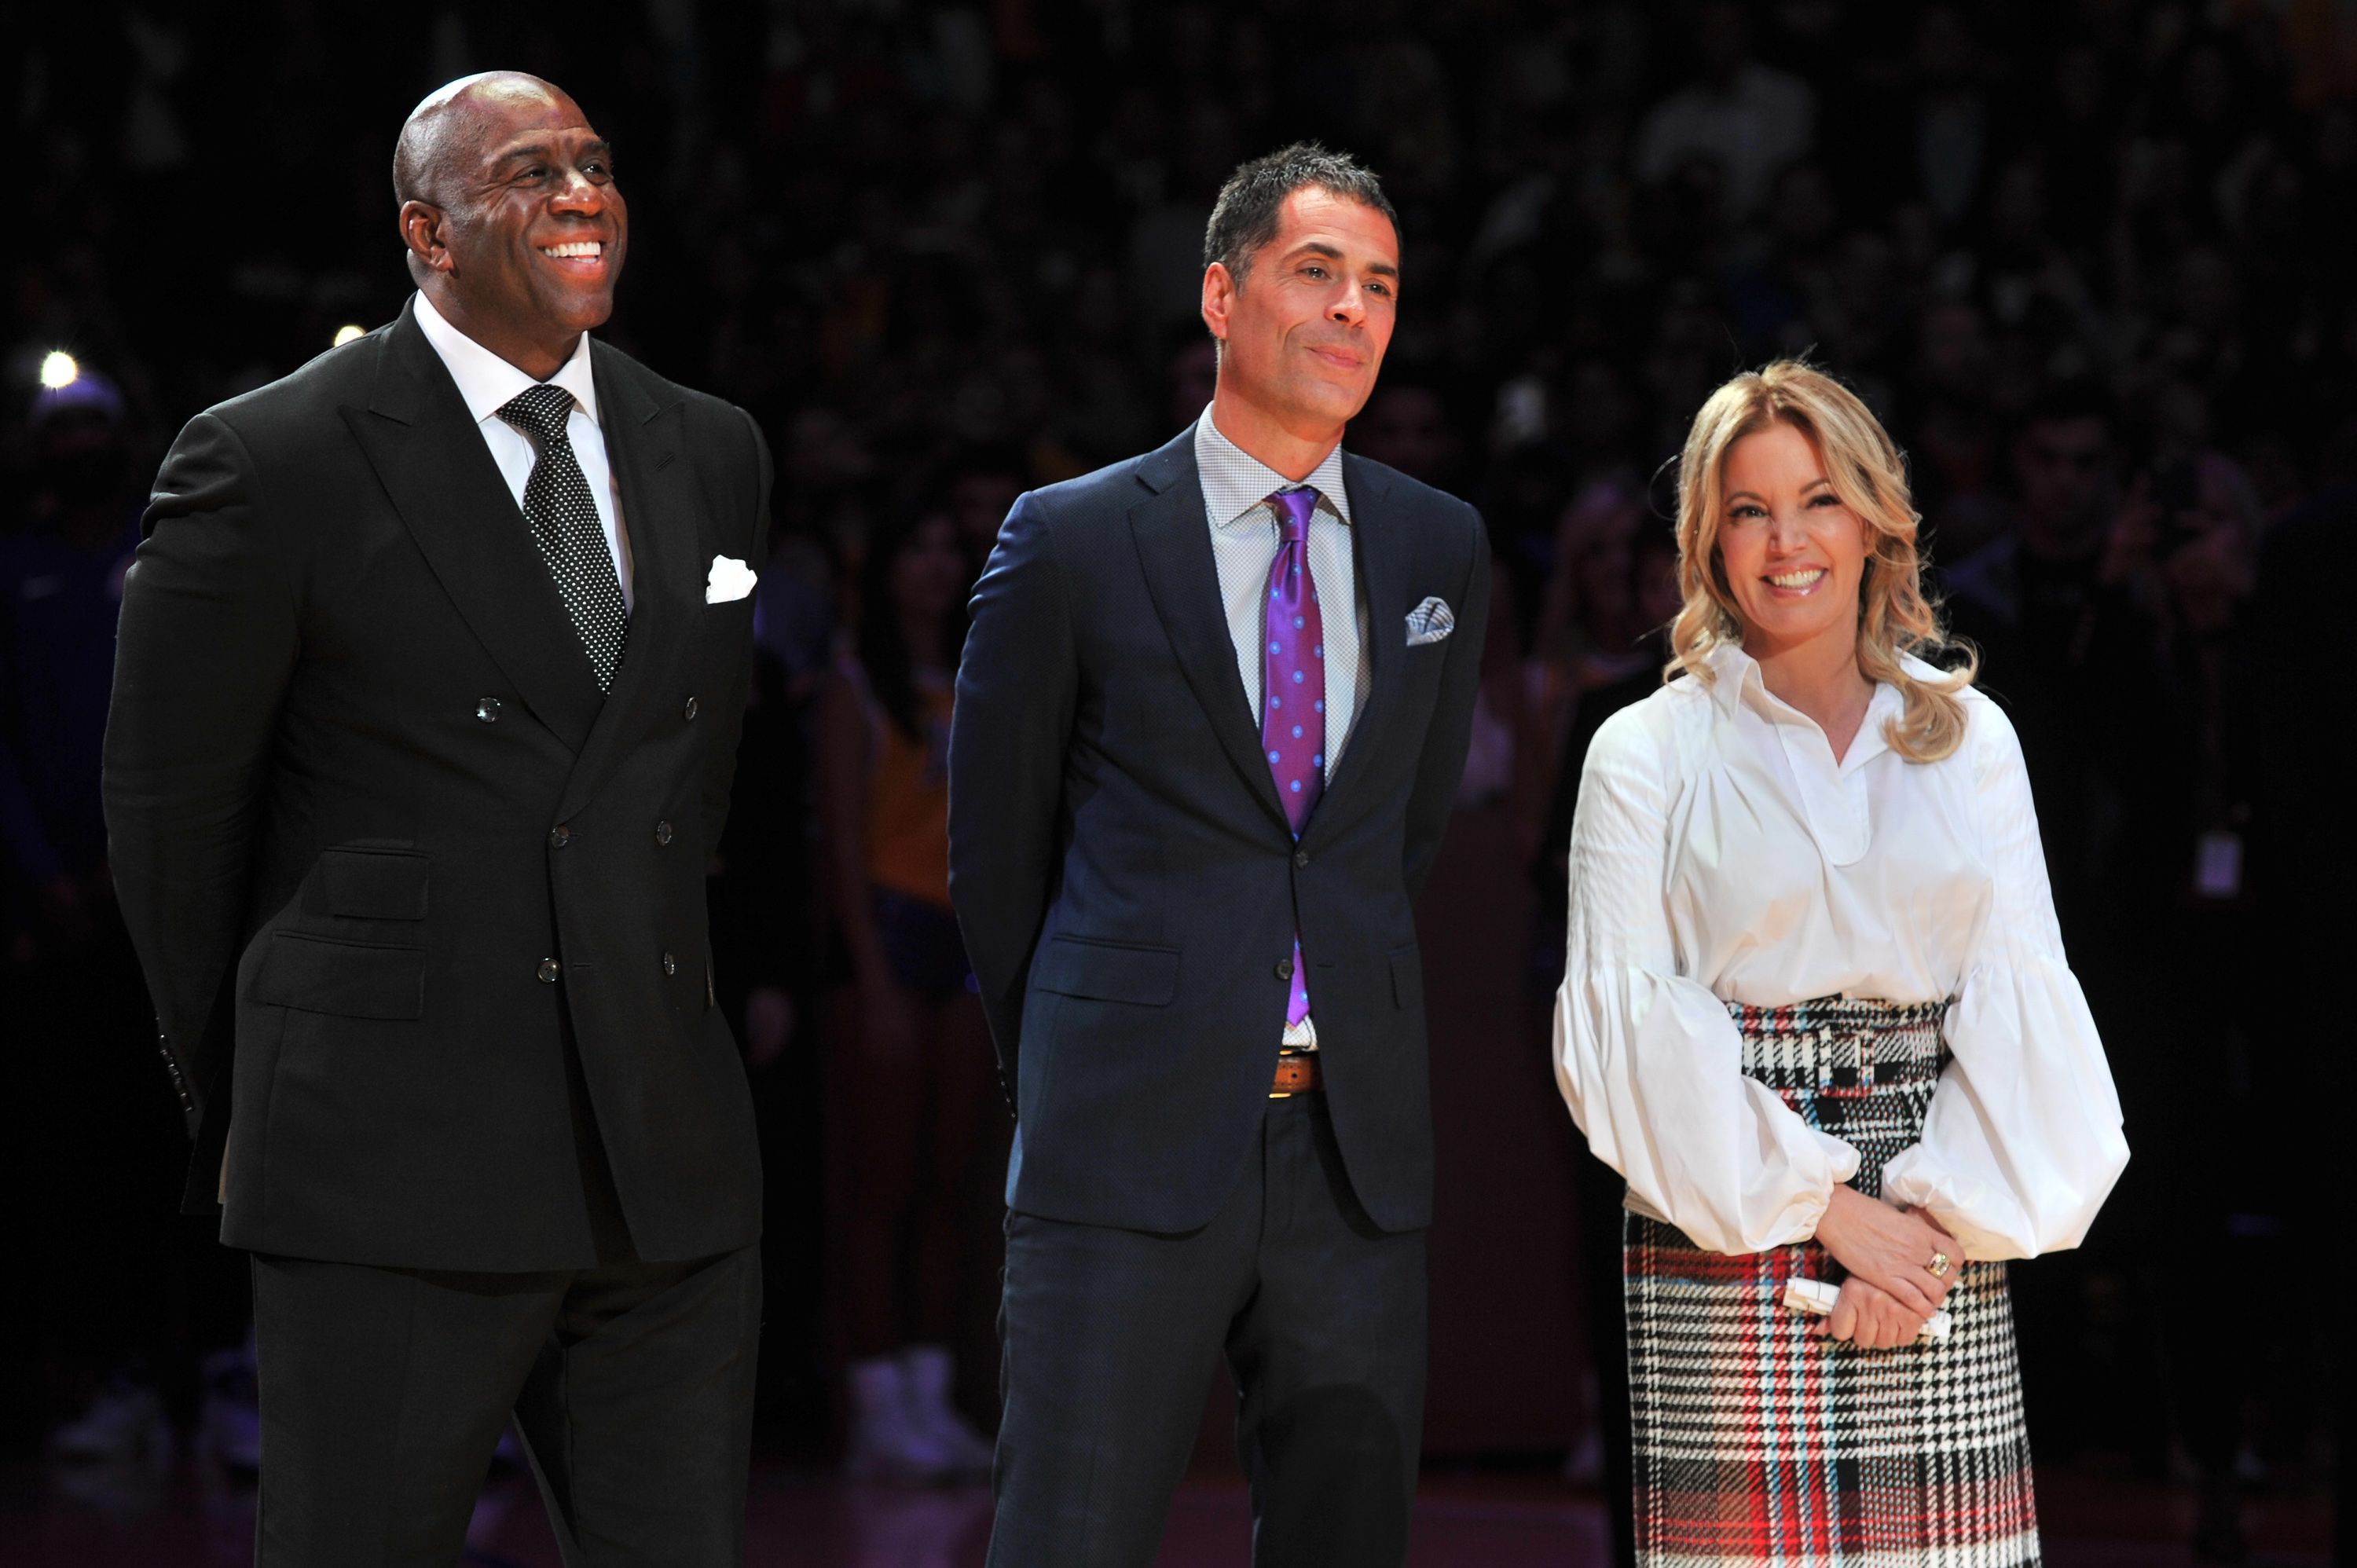 Jeanie Buss' Family: 5 Fast Facts You Need to Know